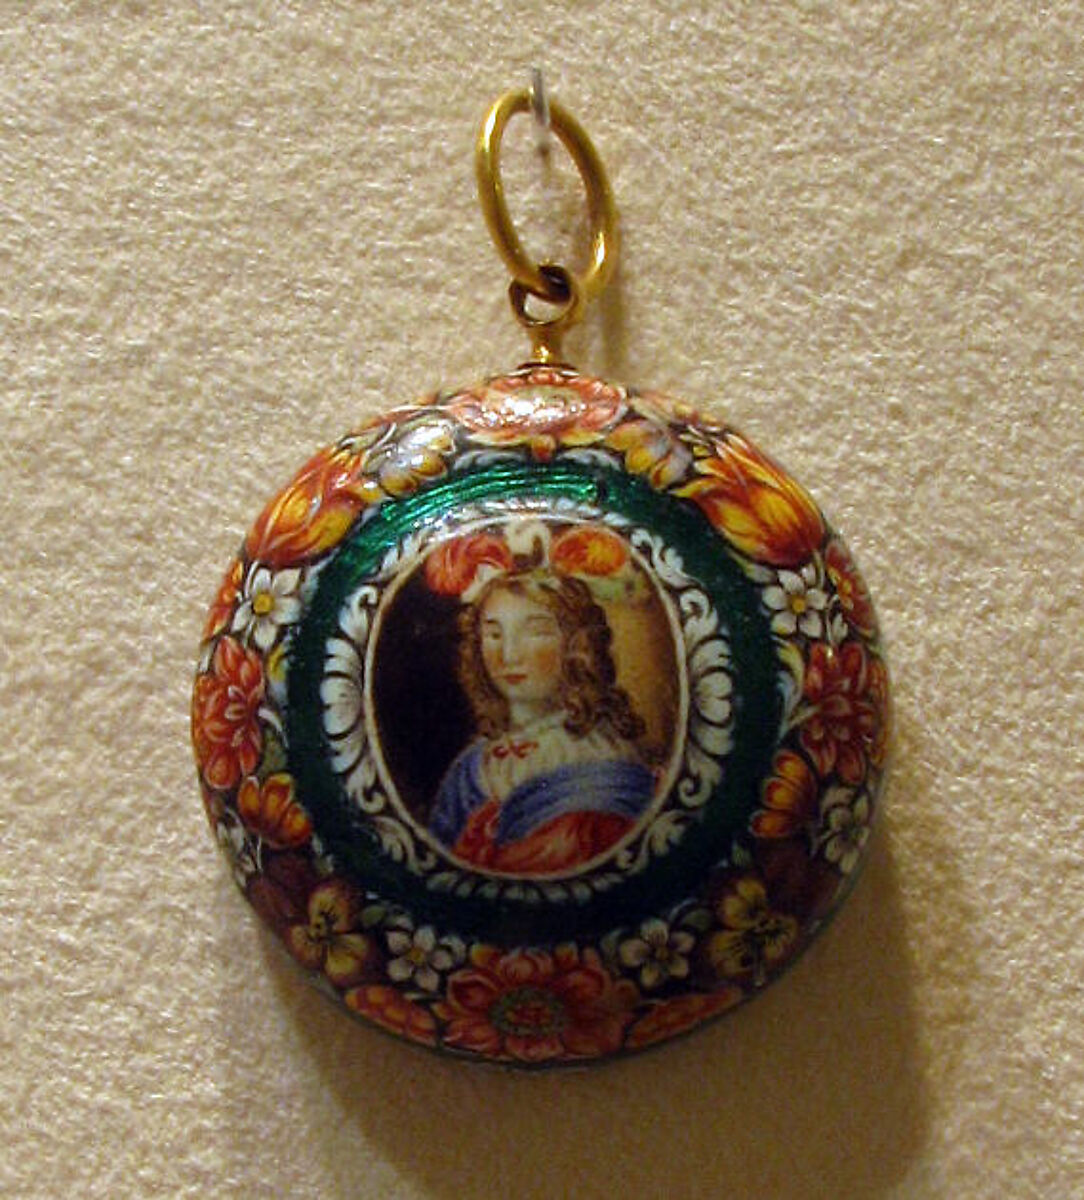 Watch, Watchmaker: Pierre Duhamel (1630–1686), Case: painted enamel on gold; Movement: gilded brass and steel, partly blued, Swiss, Geneva 